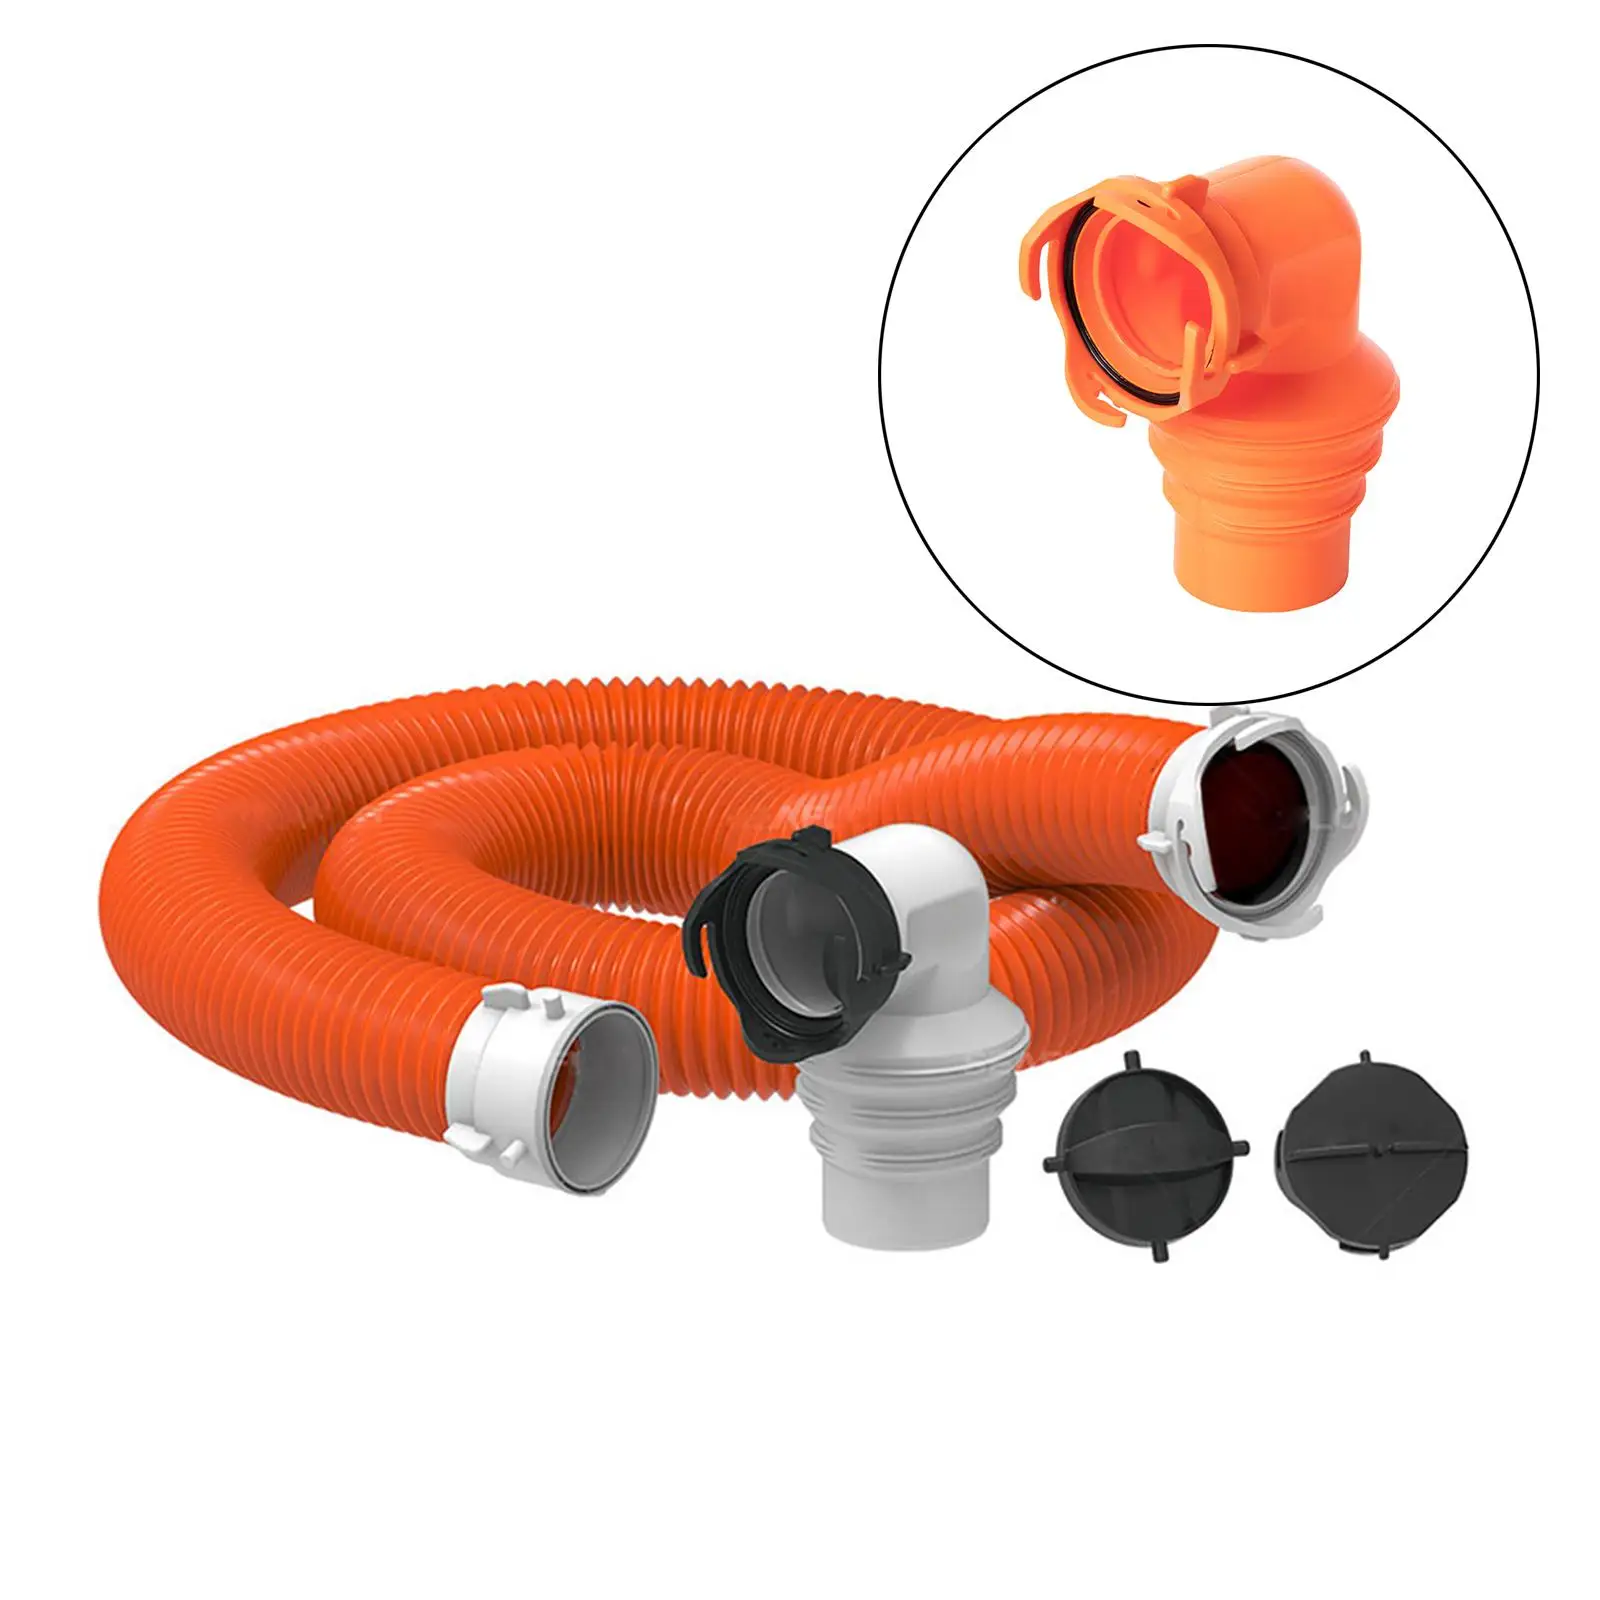 

1Pcs 90 Degree RV Sewer Hose Swivel Elbow Fitting Adapter for 3" 3-1/2" 4" Pipe Threads Orange